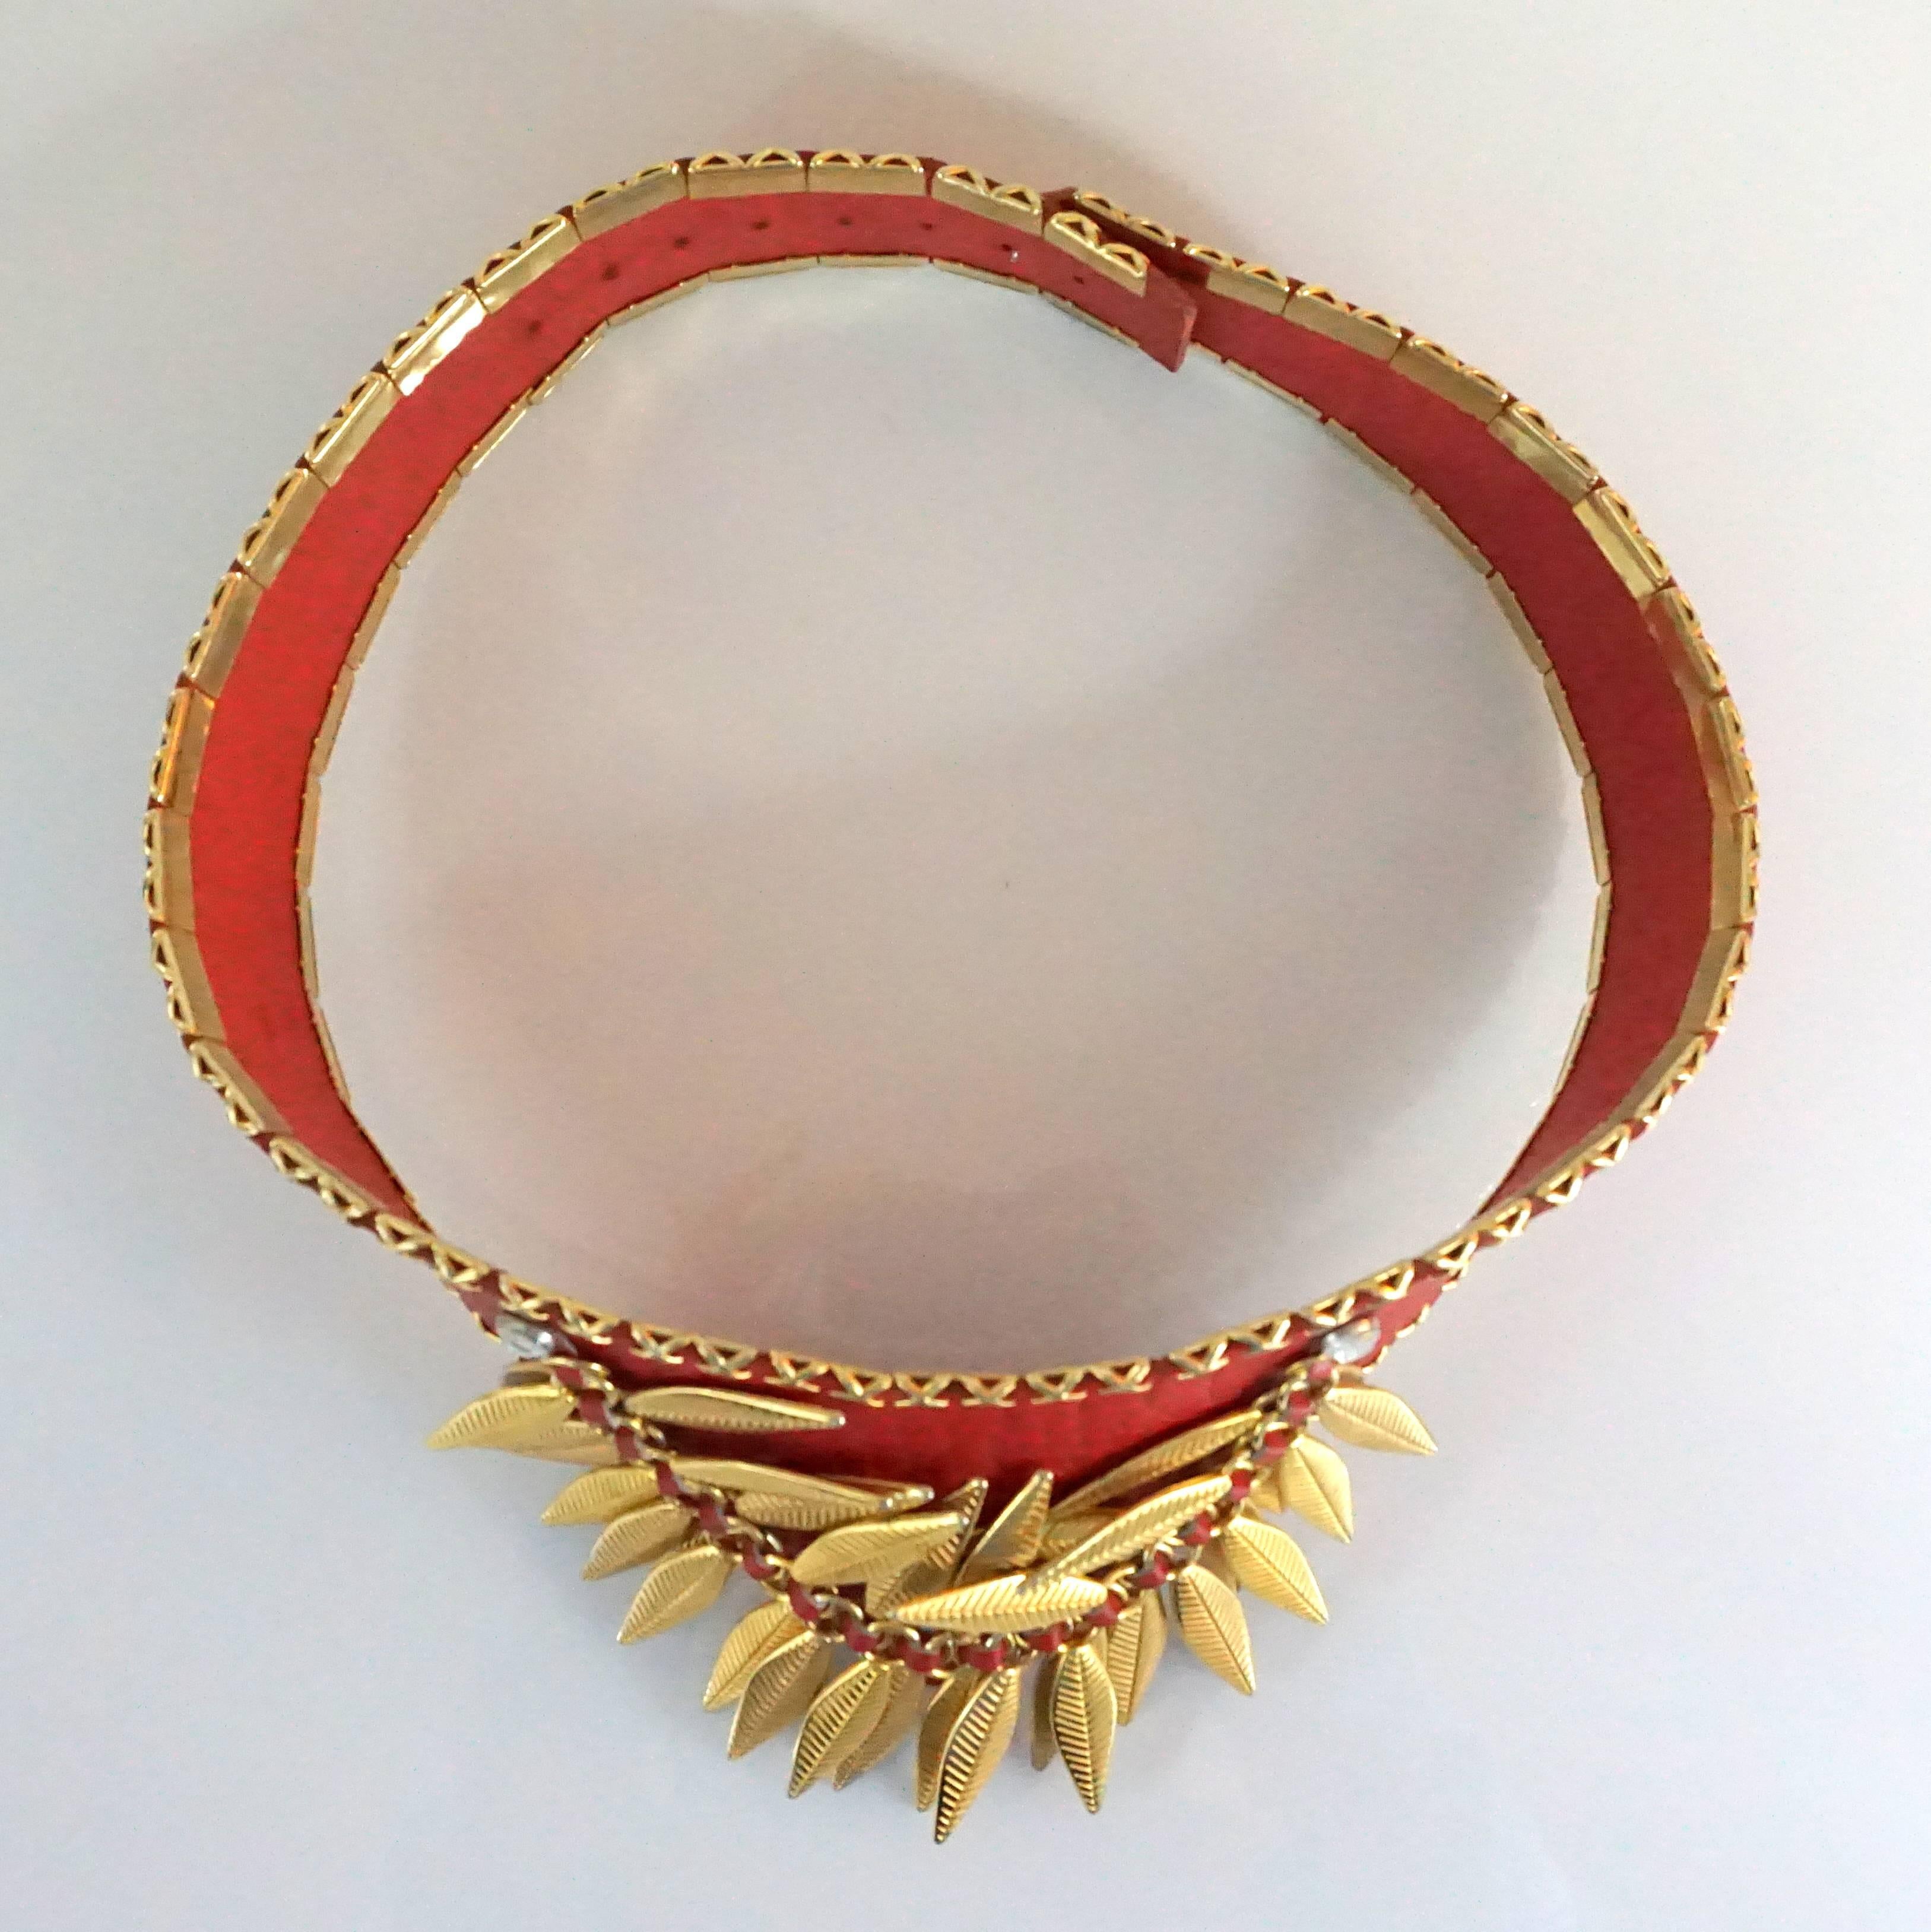 Brown Jose Cotel Red Croc Embossed Belt with Gold Chain and Leaves - 1980's